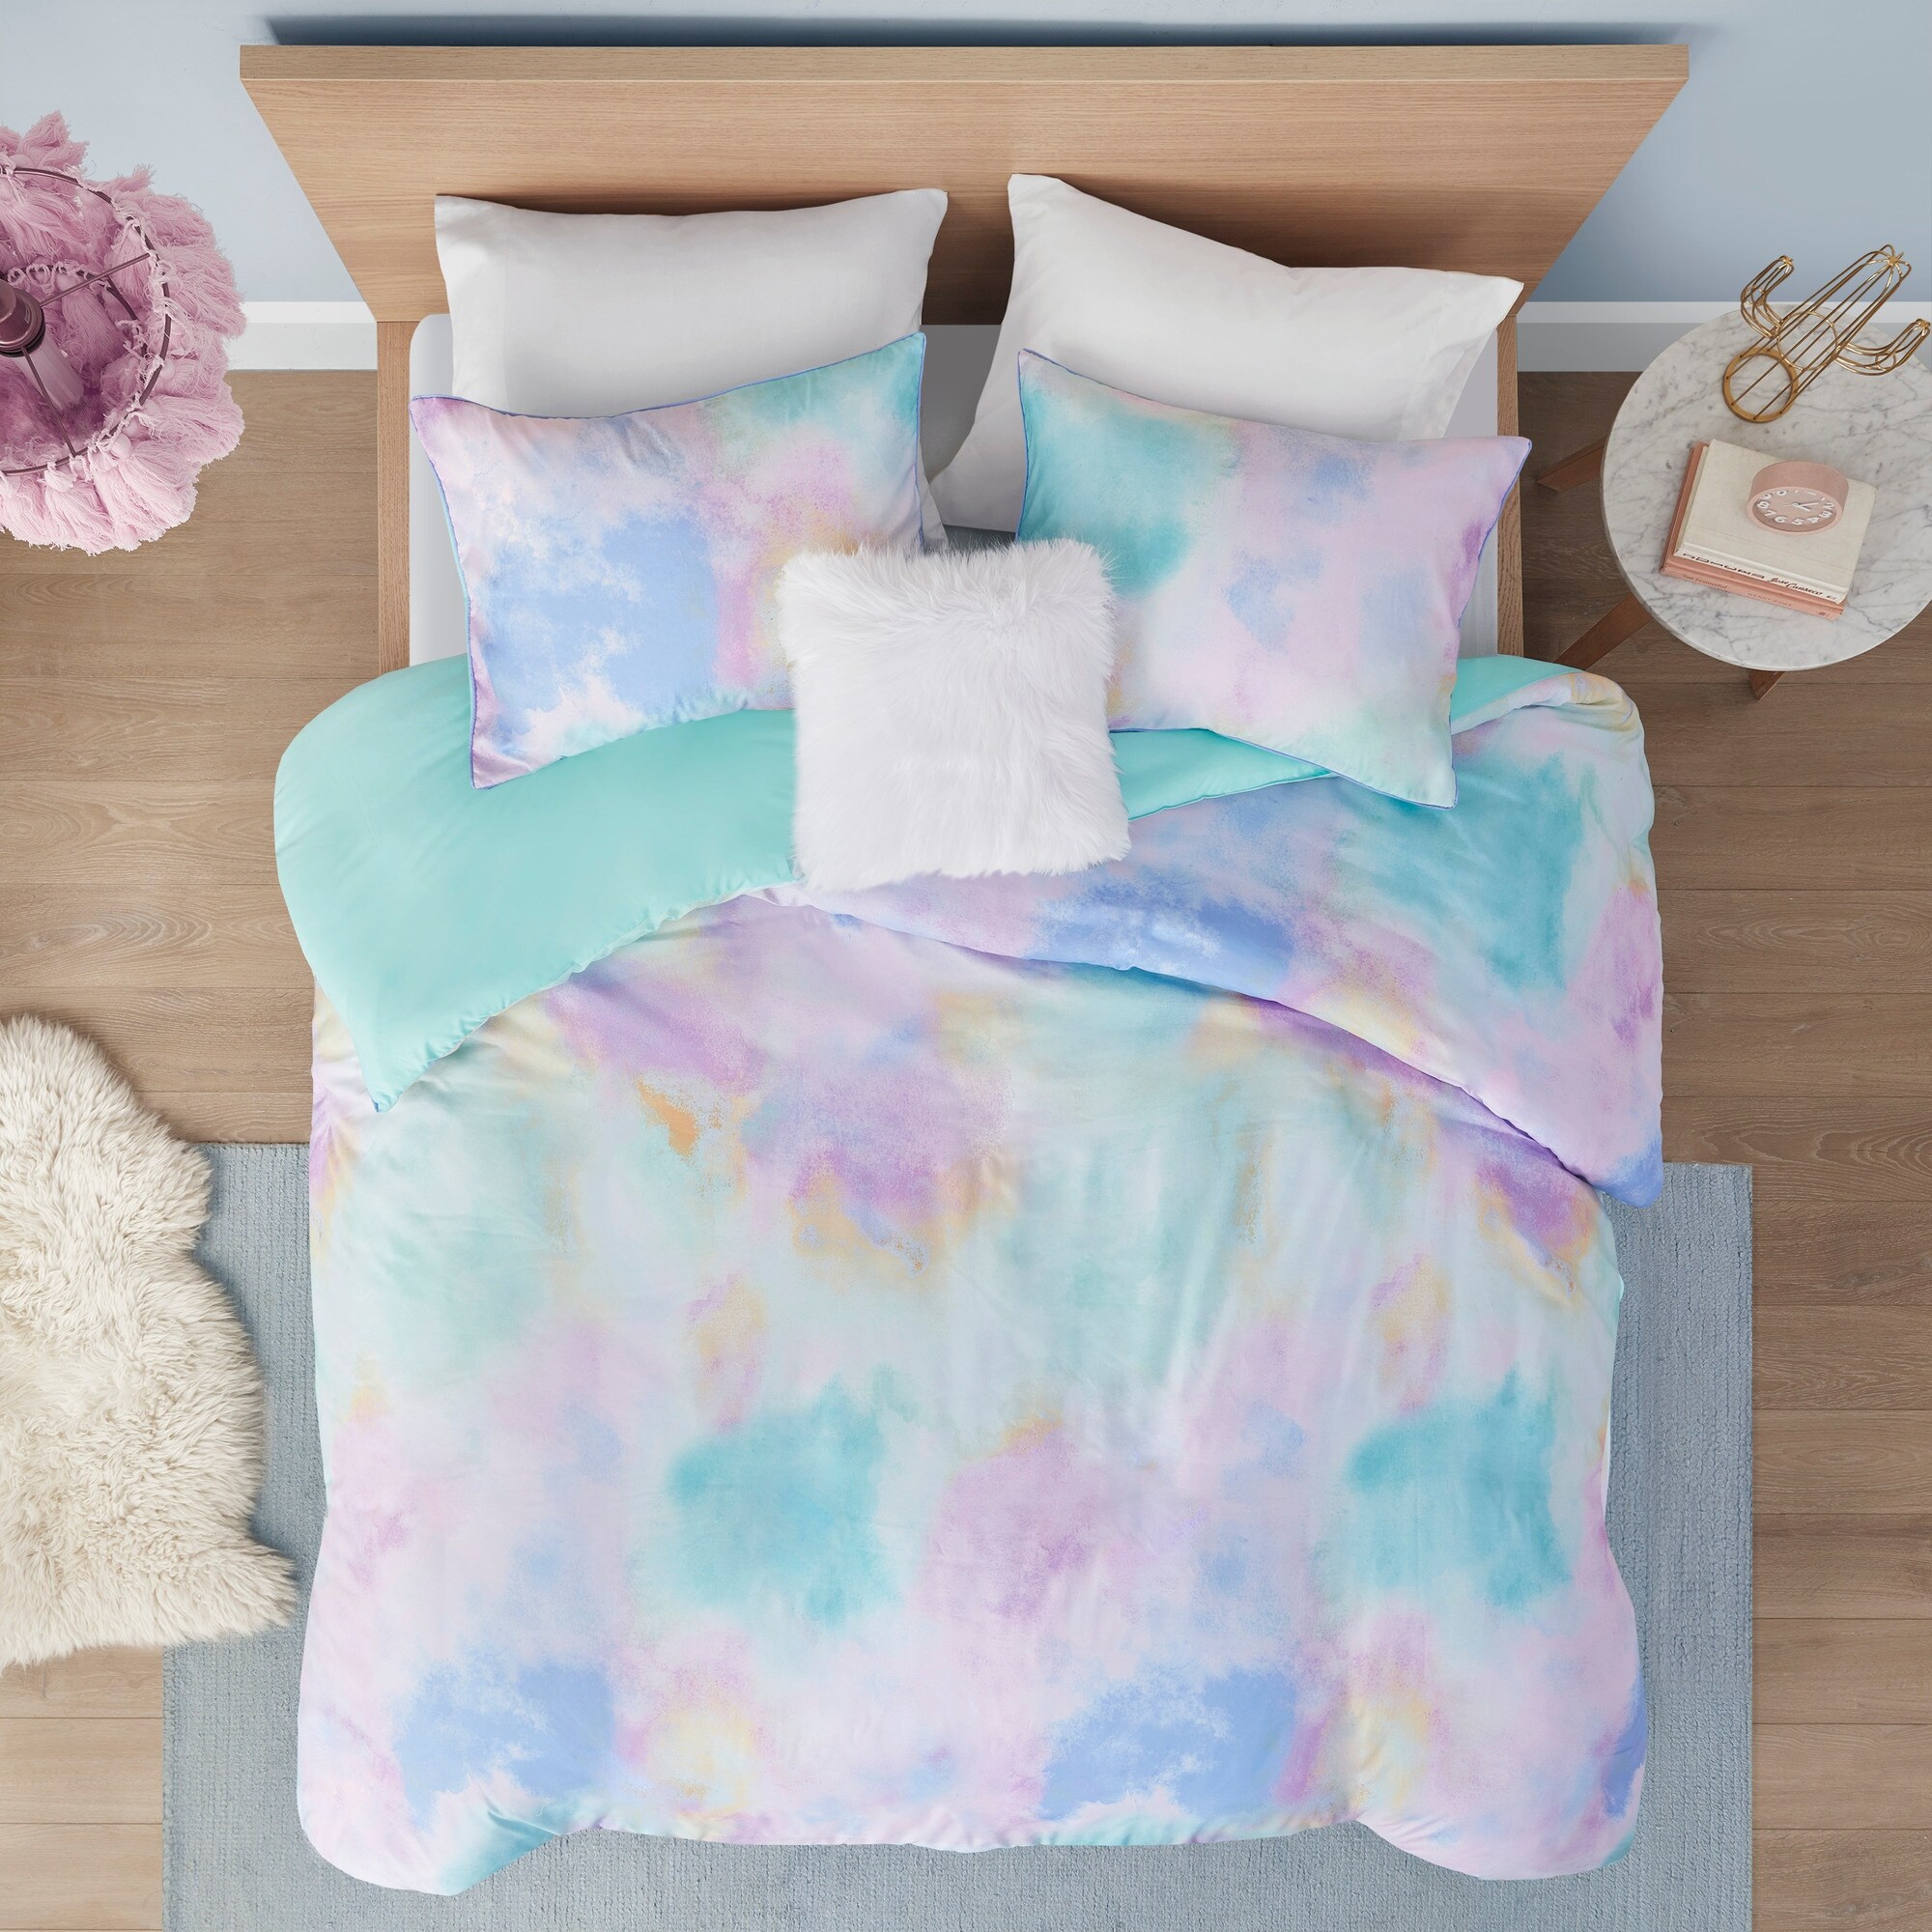 https://ak1.ostkcdn.com/images/products/is/images/direct/cf972a2332ed41680ed7841e341c11c5820cff8d/Intelligent-Design-Karissa-Watercolor-Tie-Dye-Printed-Duvet-Cover-Set-with-Throw-Pillow.jpg